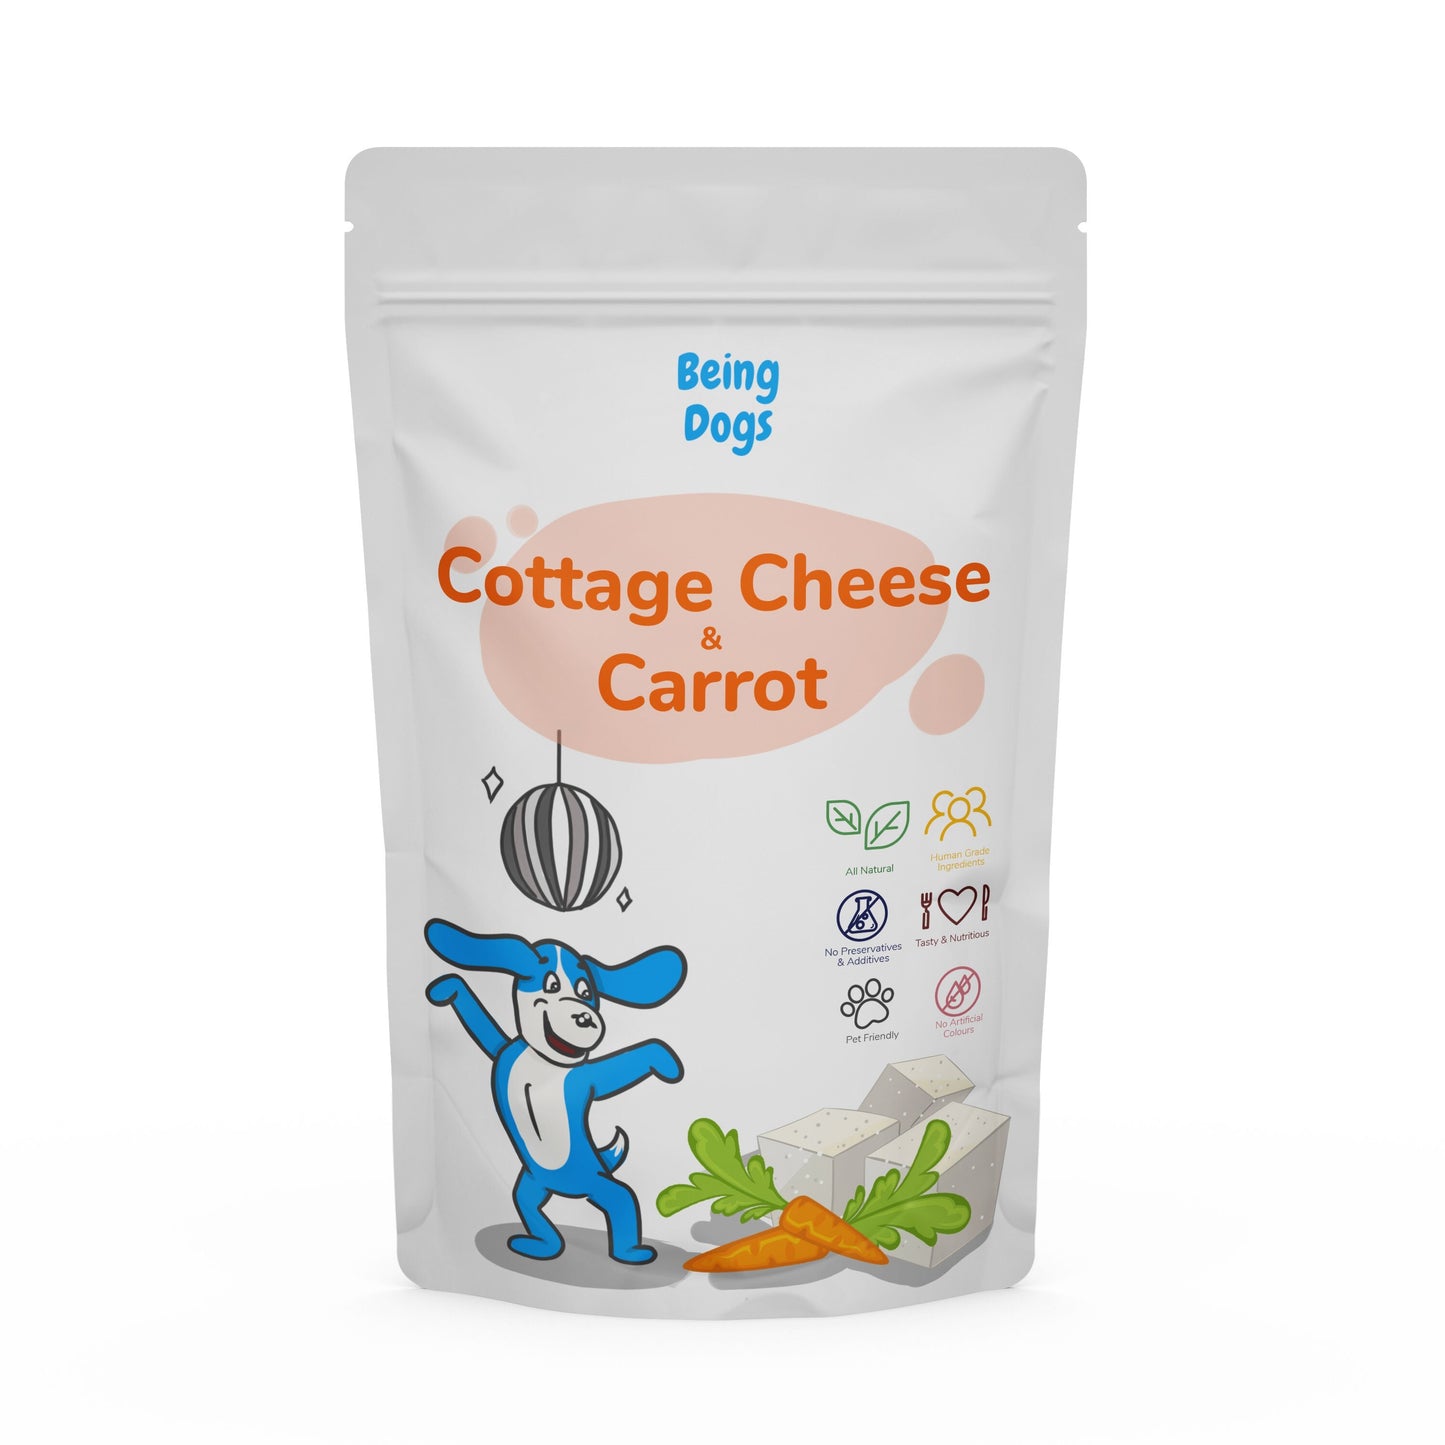 Cottage Cheese & Carrot Meal For Dogs (Single Packet), Customised, Made Fresh Daily, Zero Preservatives, High In Protein